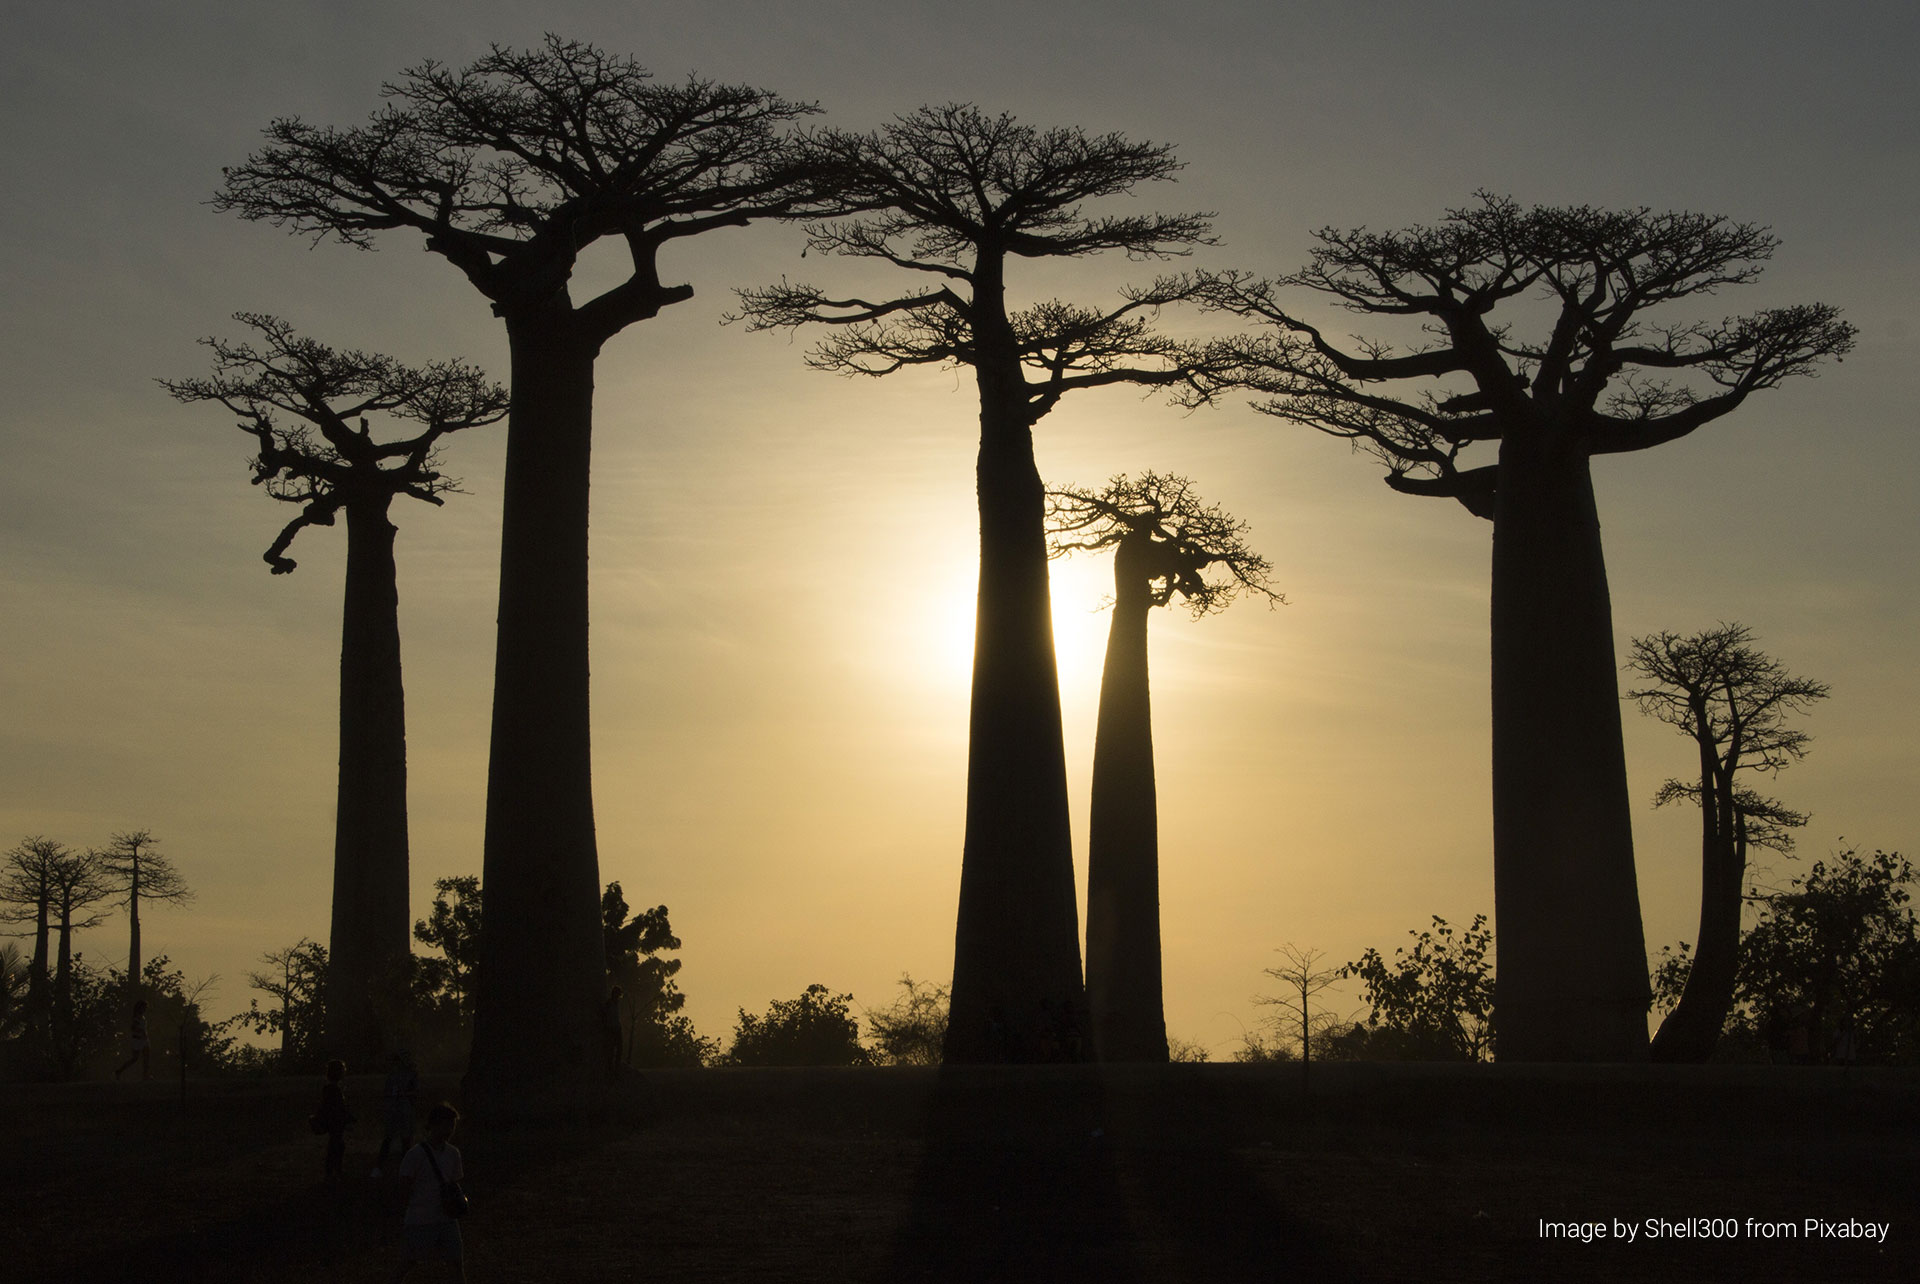 Madagascar, Baobabs, Image by Shell300 from Pixabay